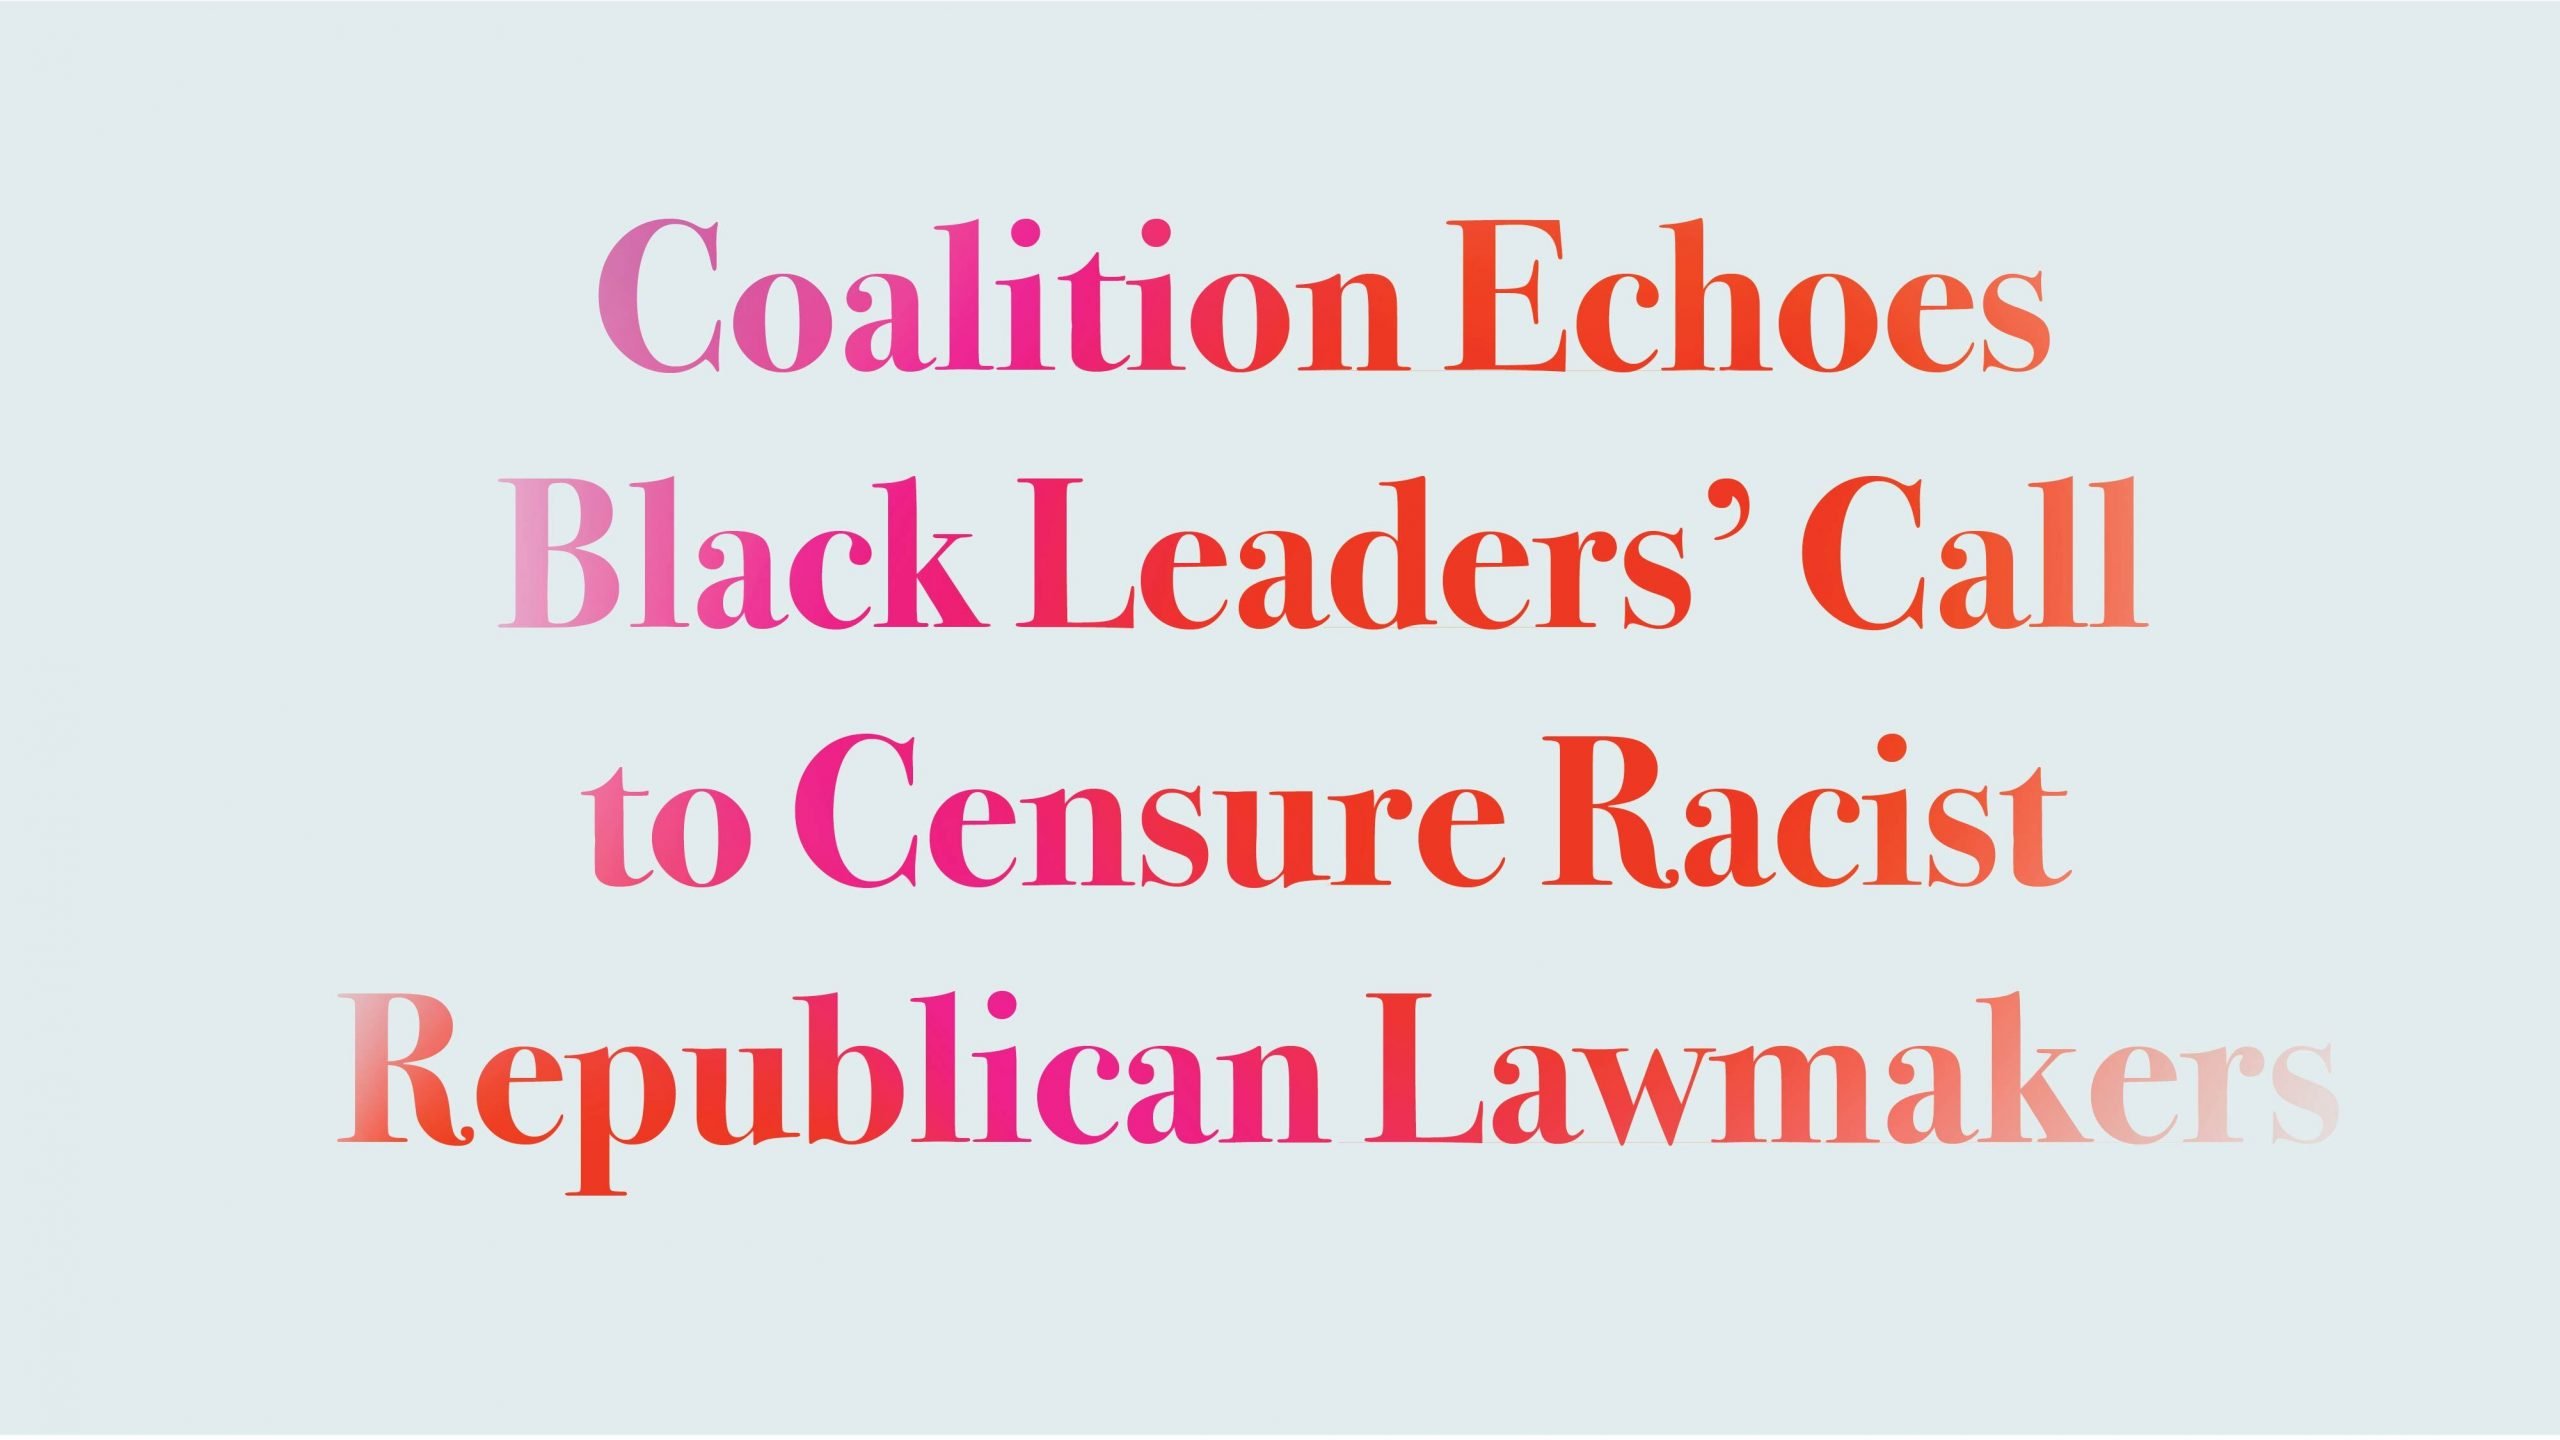 Coalition Echoes Black Leaders’ Call to Censure Racist Republican Lawmakers